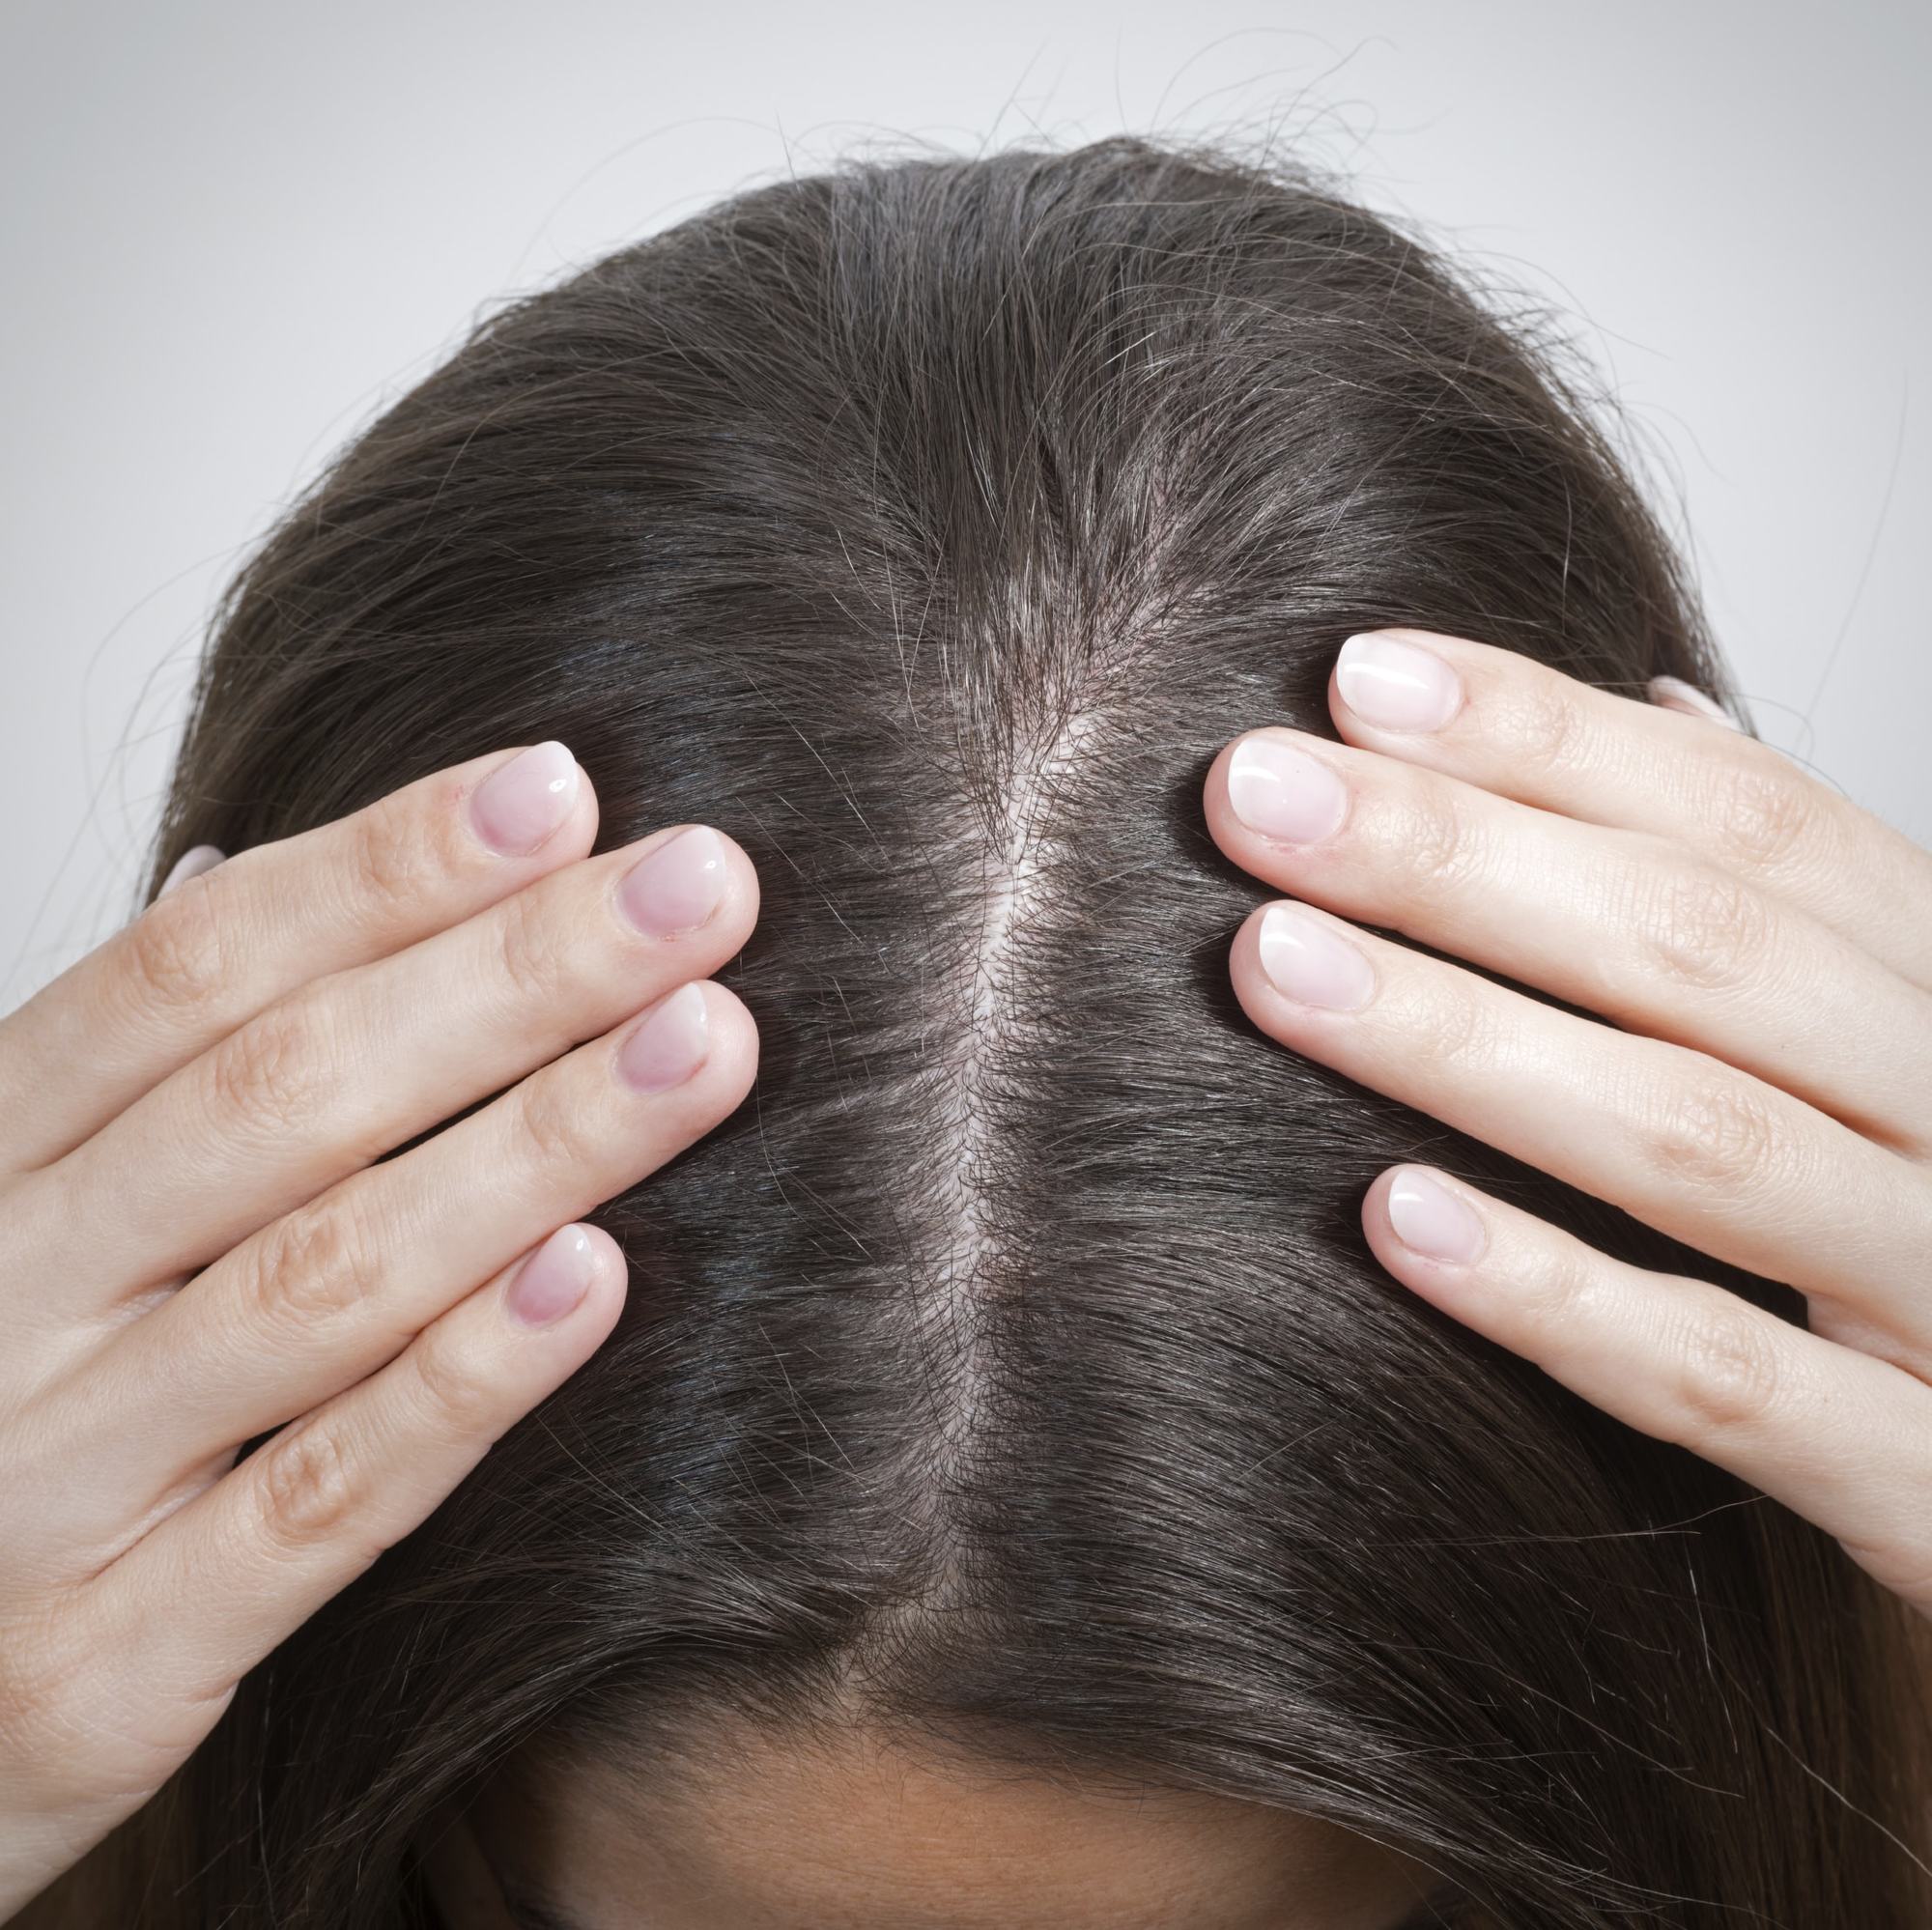 Lice vs Dandruff - How to Tell Difference Between Lice & Dandruff